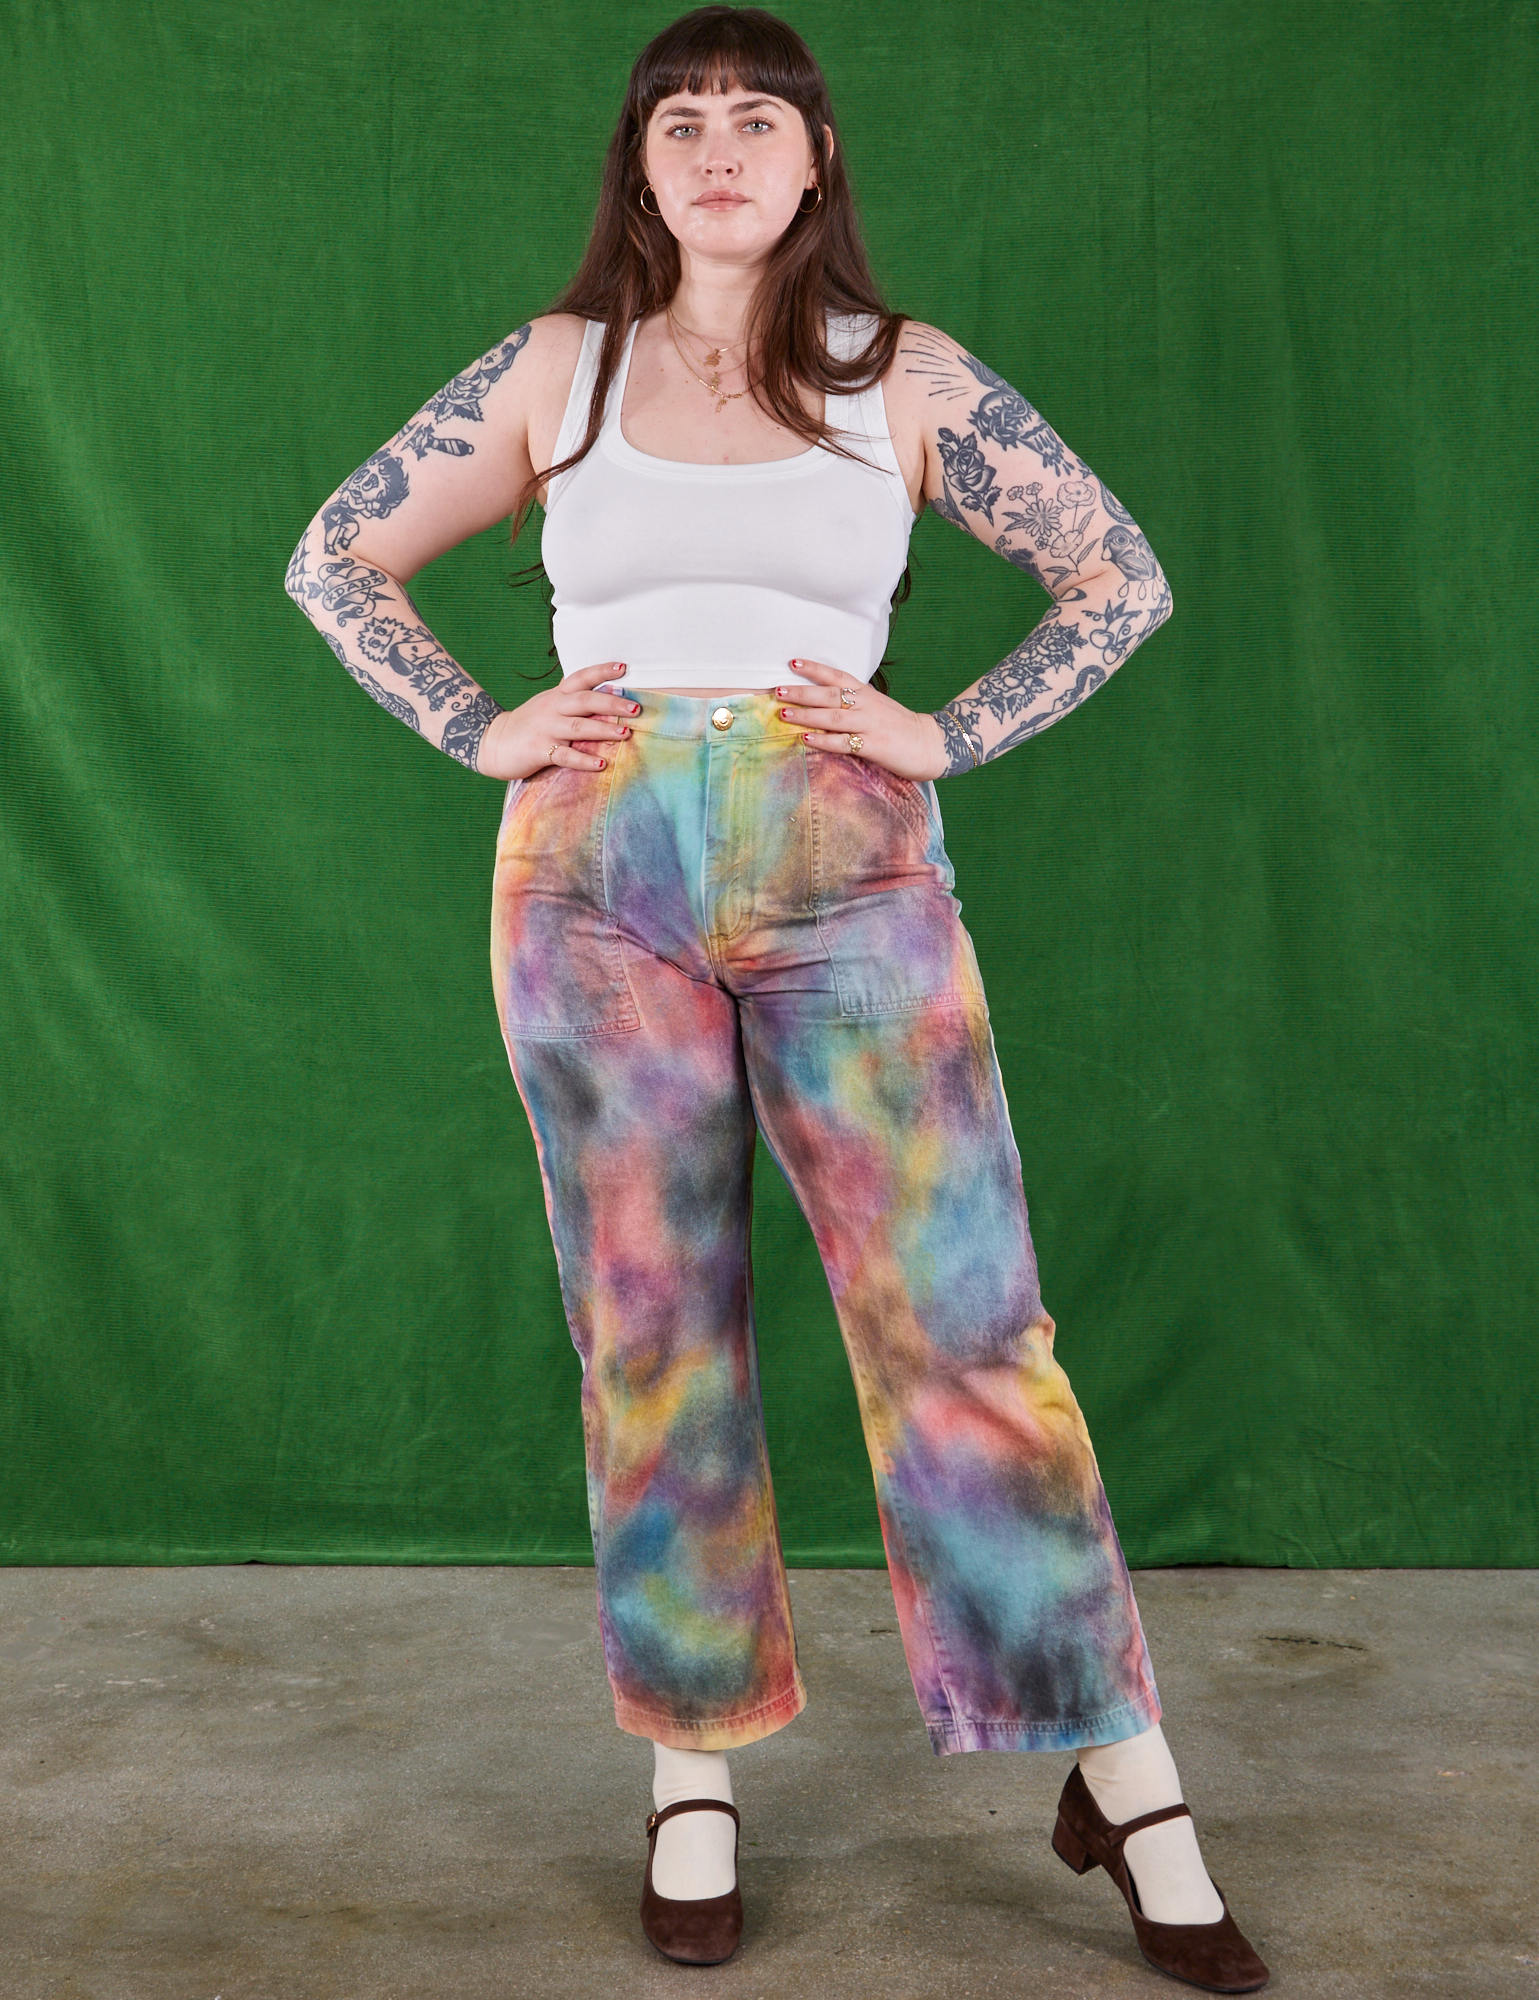 Sydney is 5'8" and wearing size L  Airbrush Palette Work Pants paired with a Cropped Tank in Vintage Tee Off-White